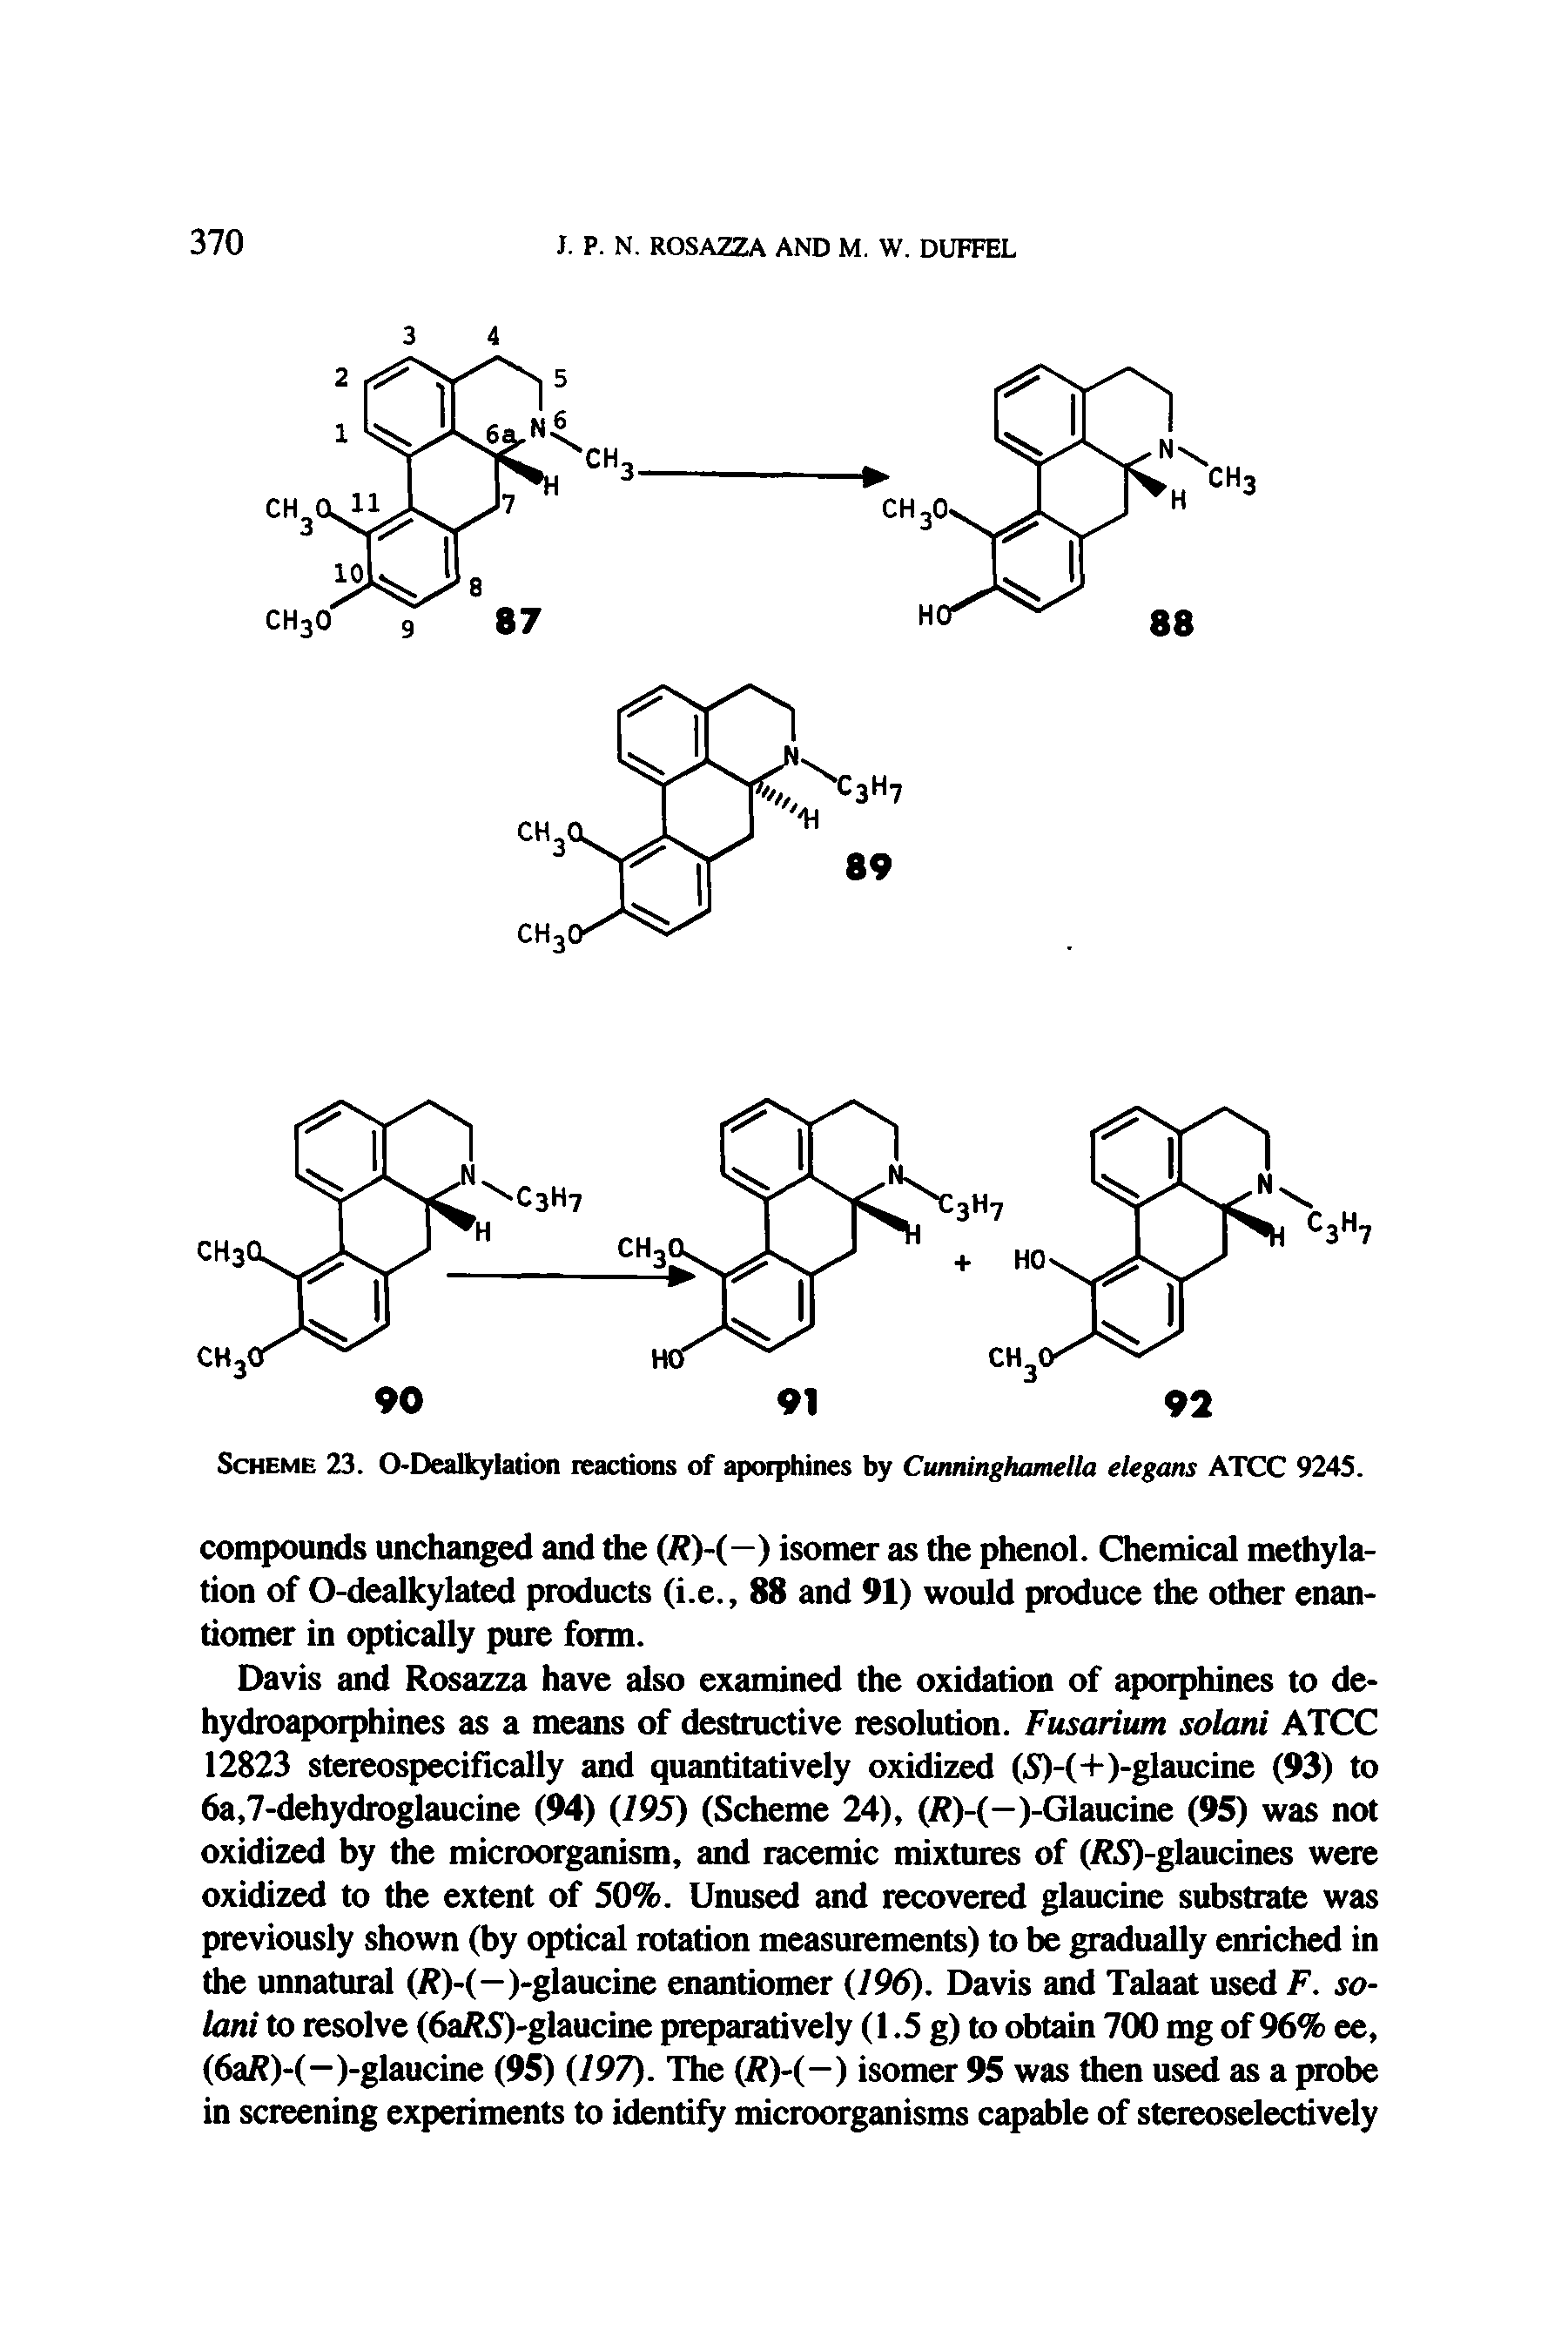 Scheme 23. O-Dealkylation reactions of apoiphines by Cunninghamella elegans ATCC 9245.